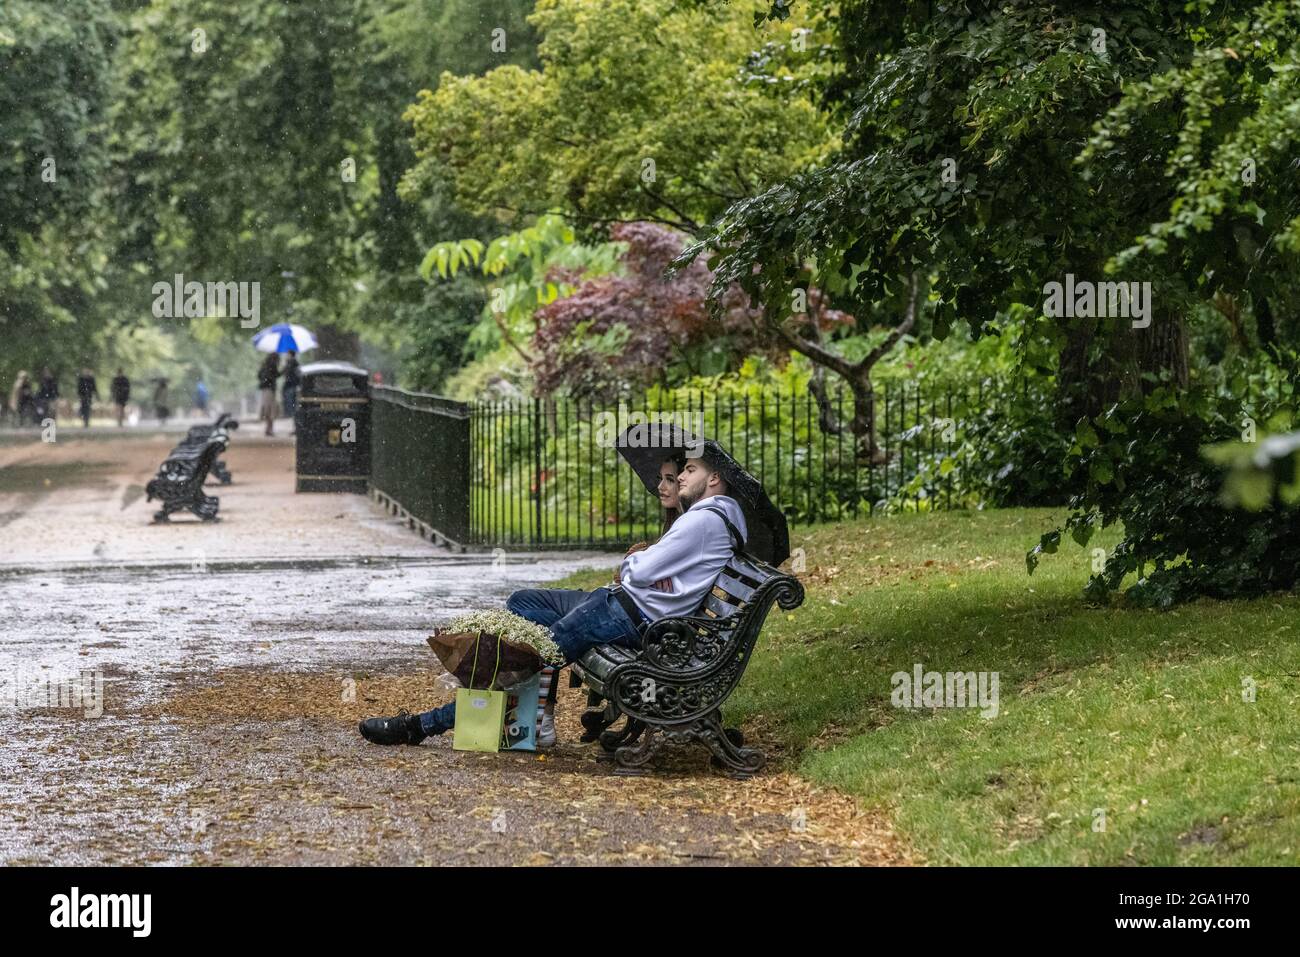 London, UK. July 28 2021: London, UK. July 28 2021: Heavy Rain Showers, Central London, England, UK Picture shows a couple taking cover underneath their umbrella from the rain in Hyde Park as heavy rain showers sweep across Central London and southern parts of England. Credit: Clickpics/Alamy Live News Stock Photo